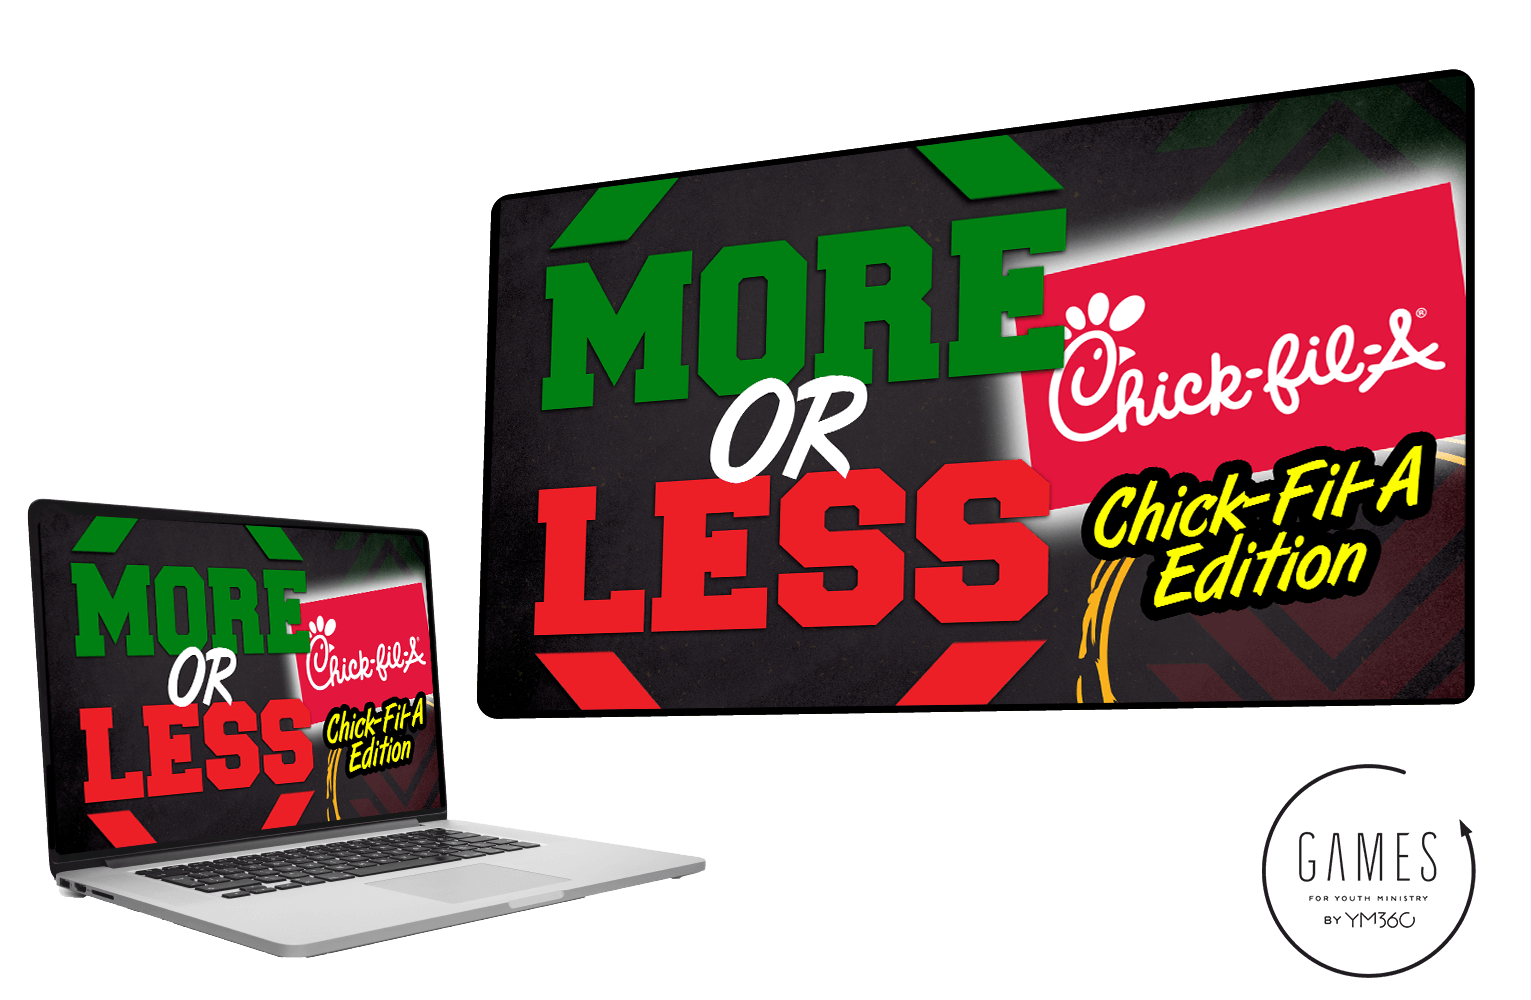 More or Less: Chick-Fil-A Edition